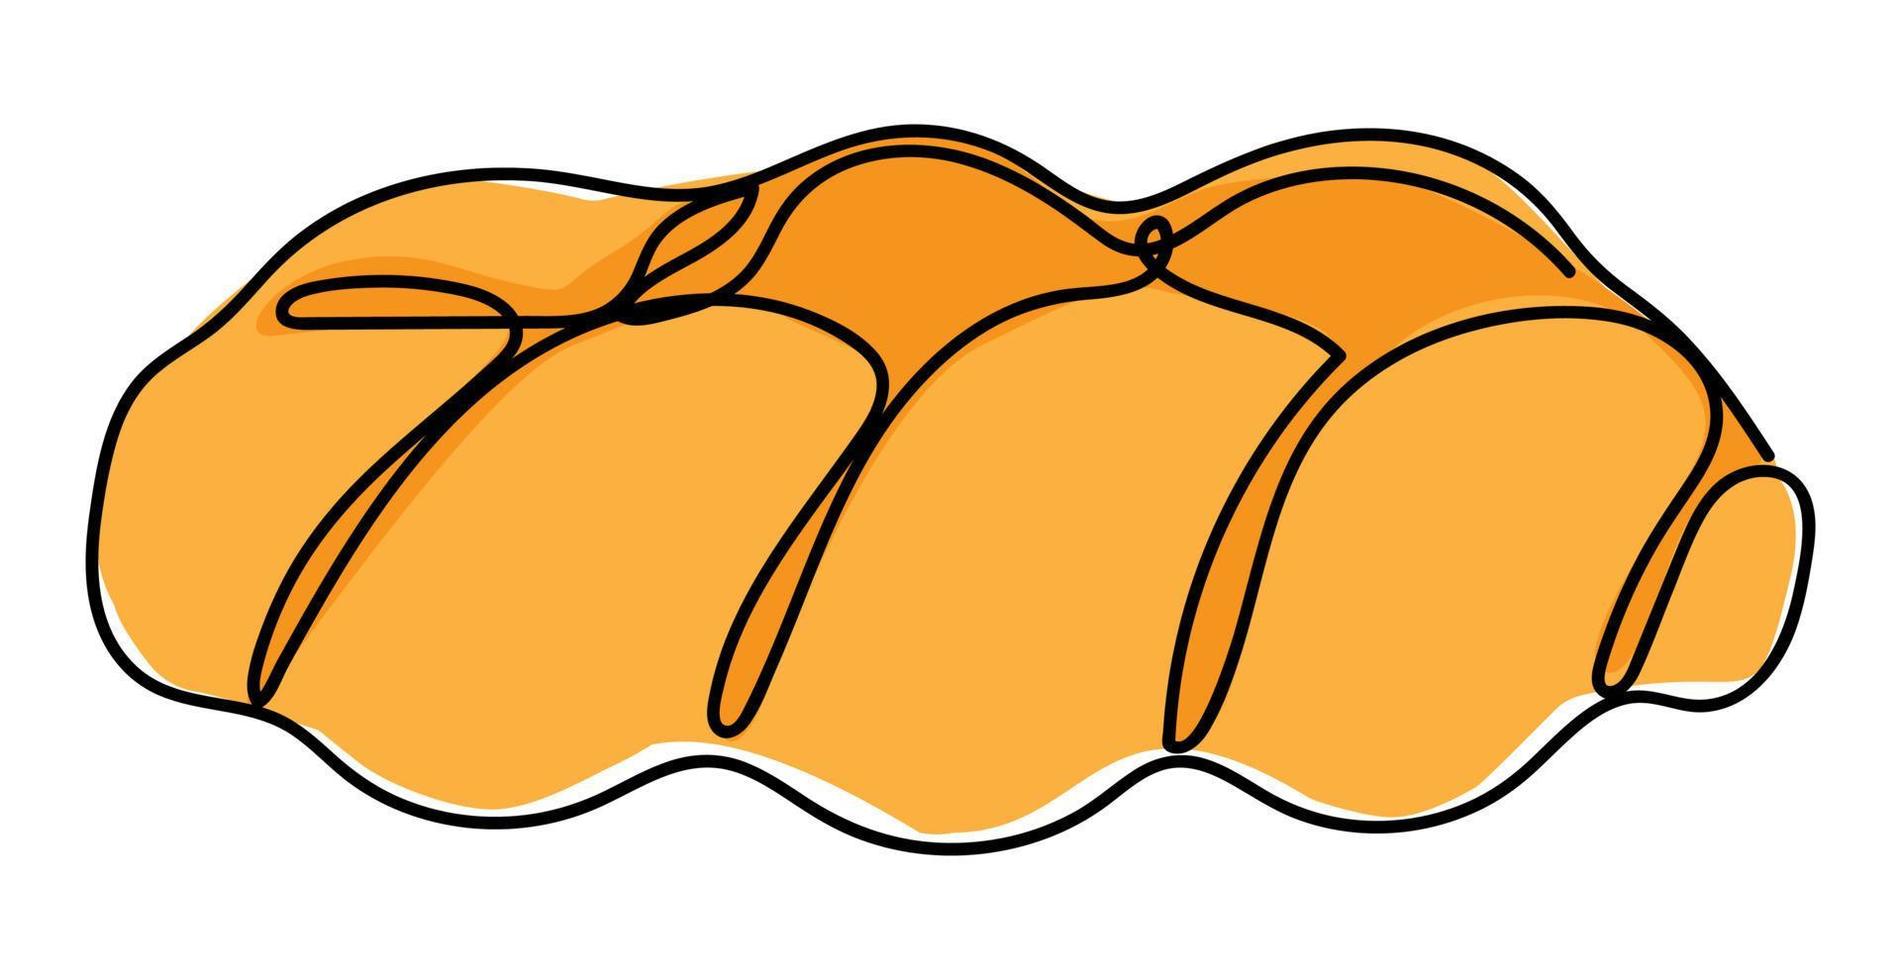 Continuous line bread. Vector line art. Bakery product for logo, packaging design, icon